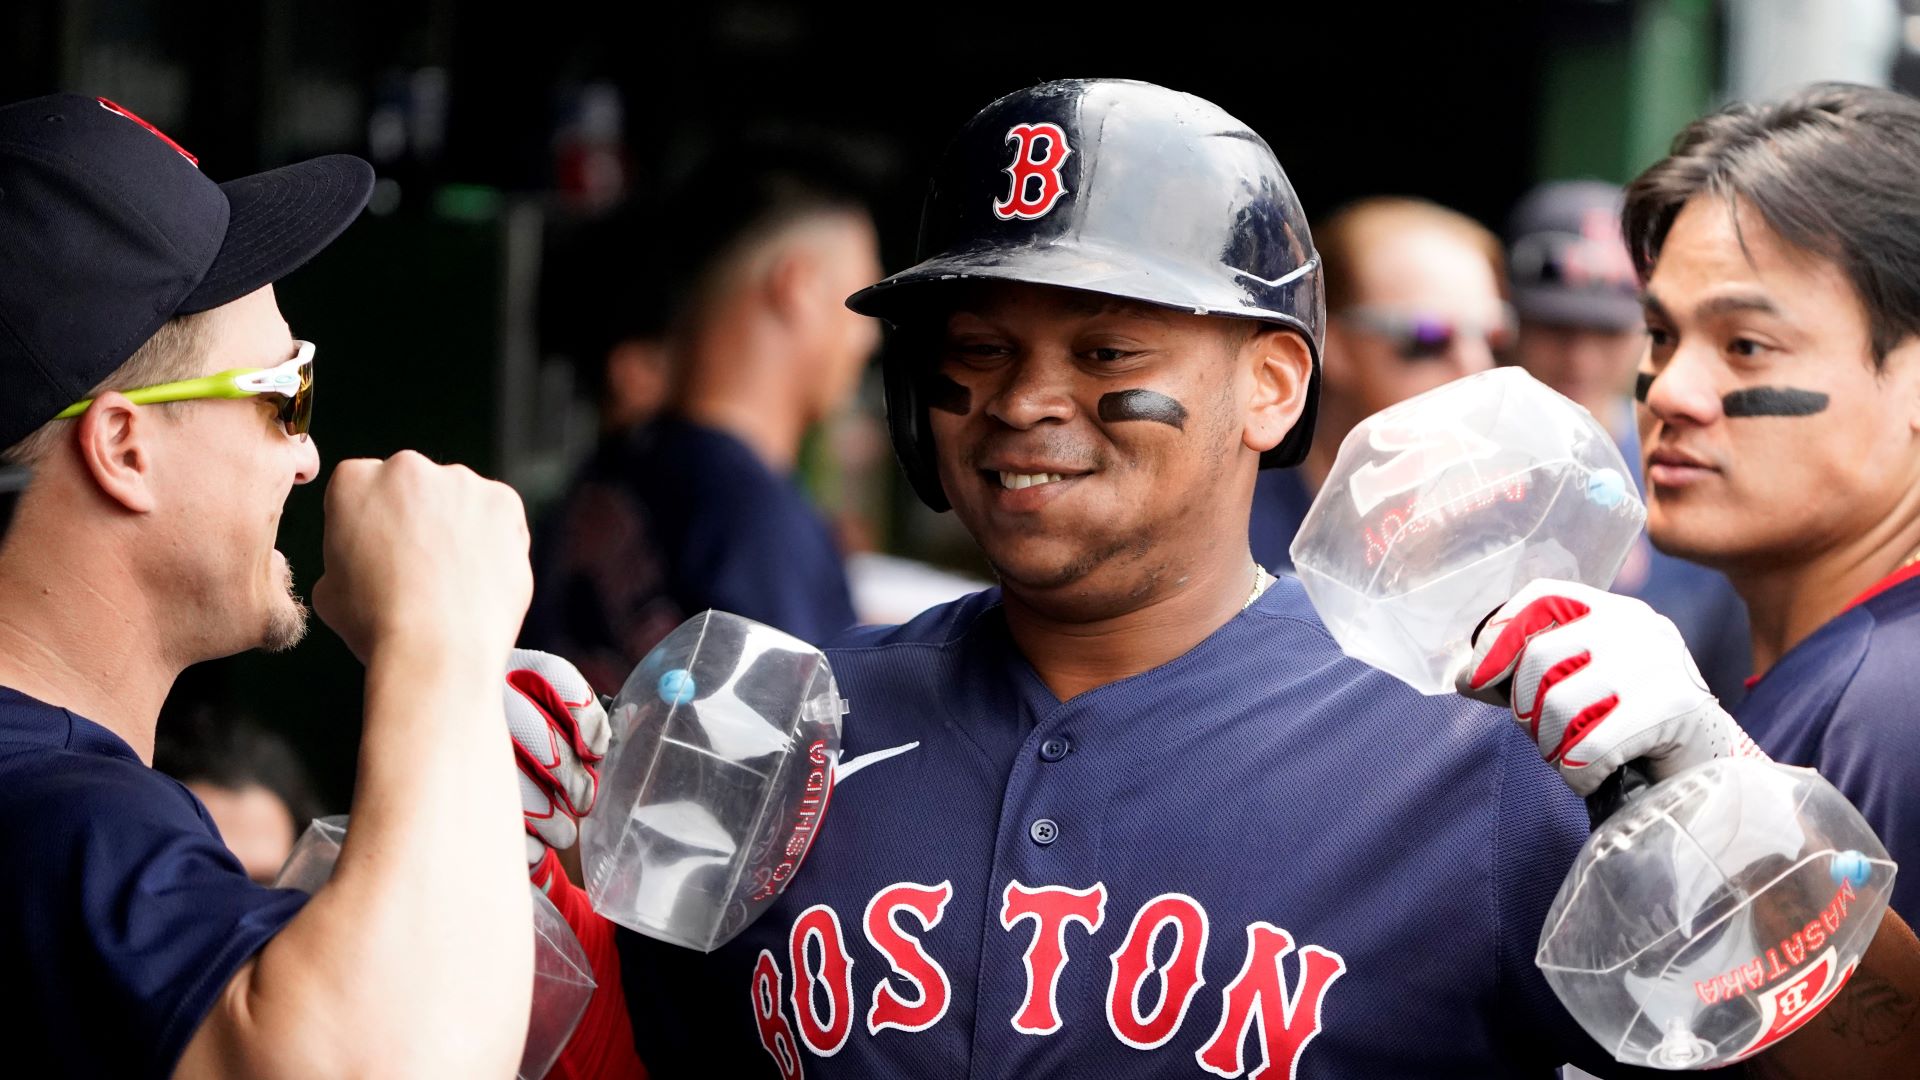 Can Alex Cora's return to Red Sox help Rafael Devers get back on track?